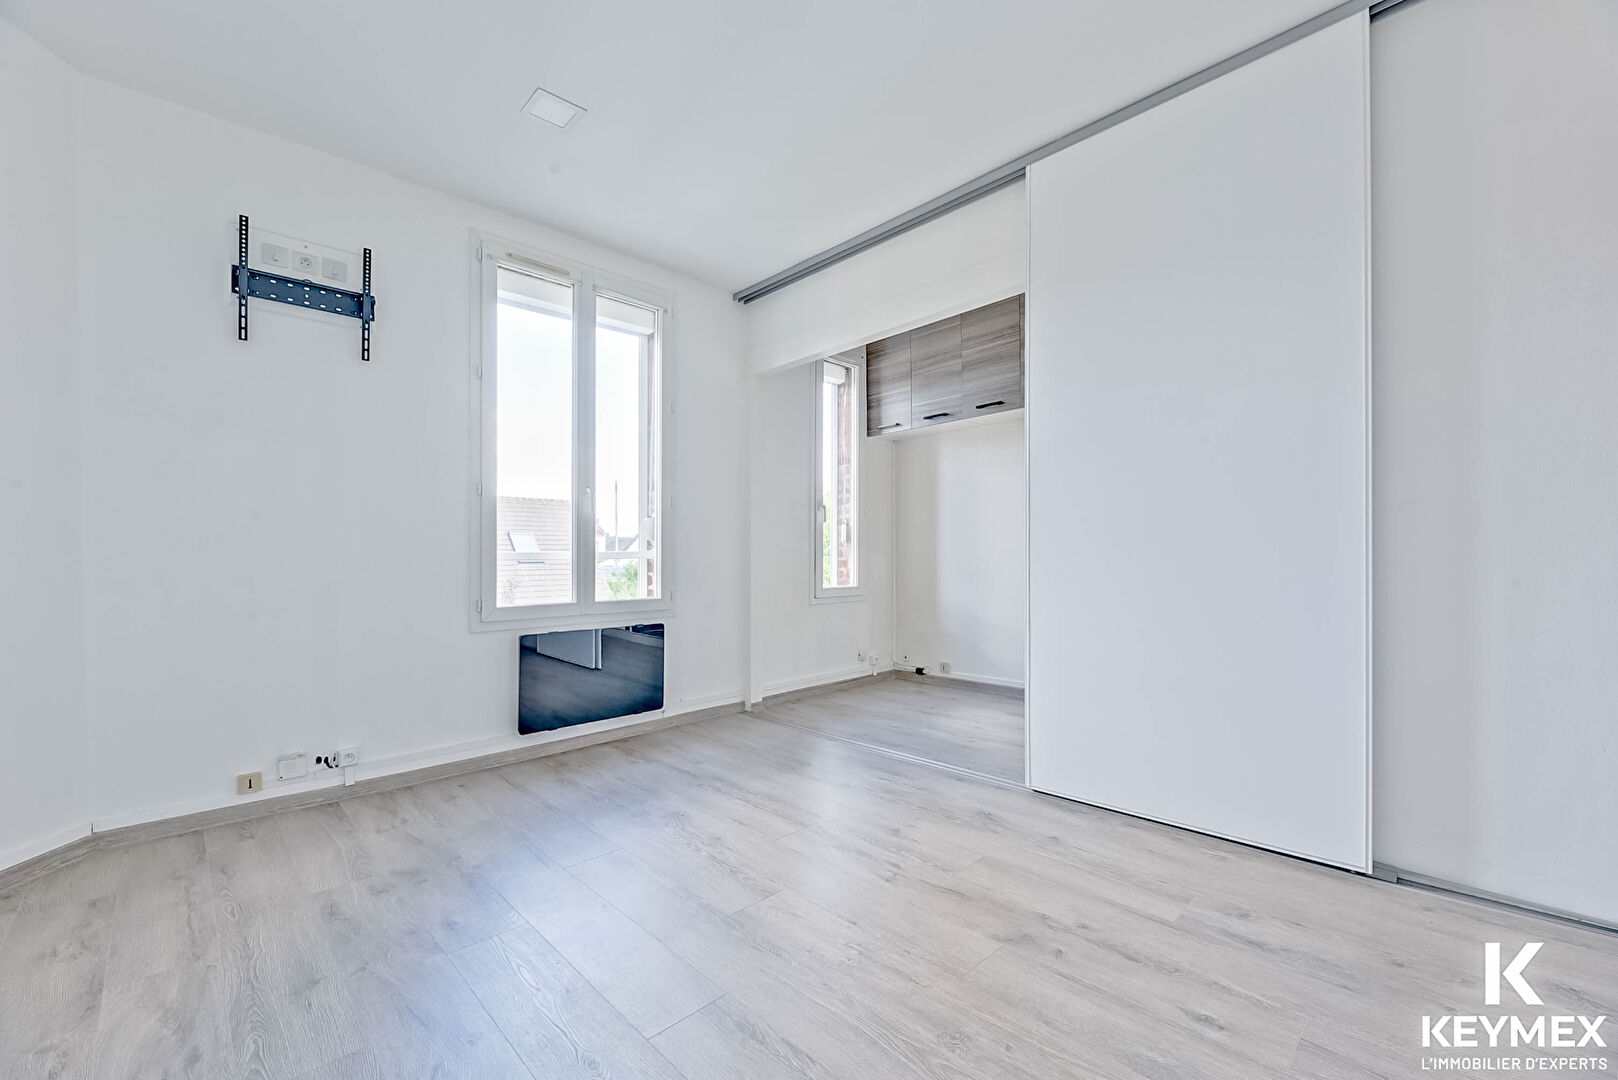 Appartement
CHAMBLY